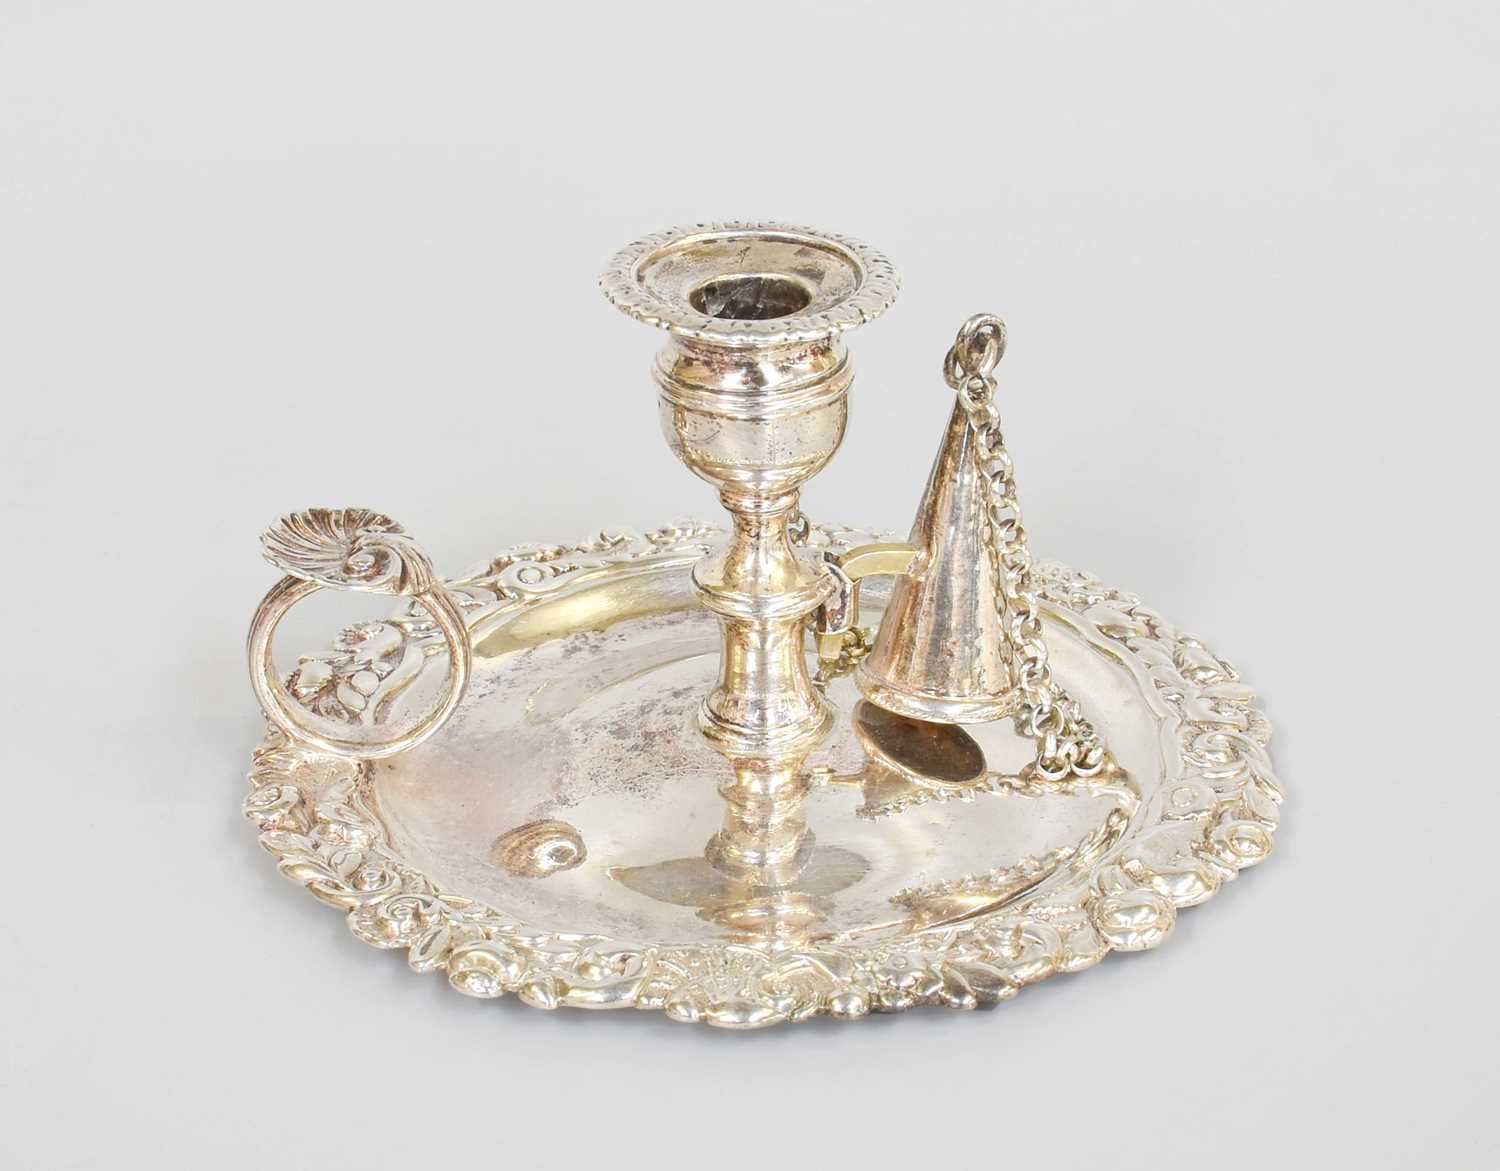 A George IV Silver Chamber-Candlestick, by Rebecca Emes and Edward Barnard, London, 1821, shaped